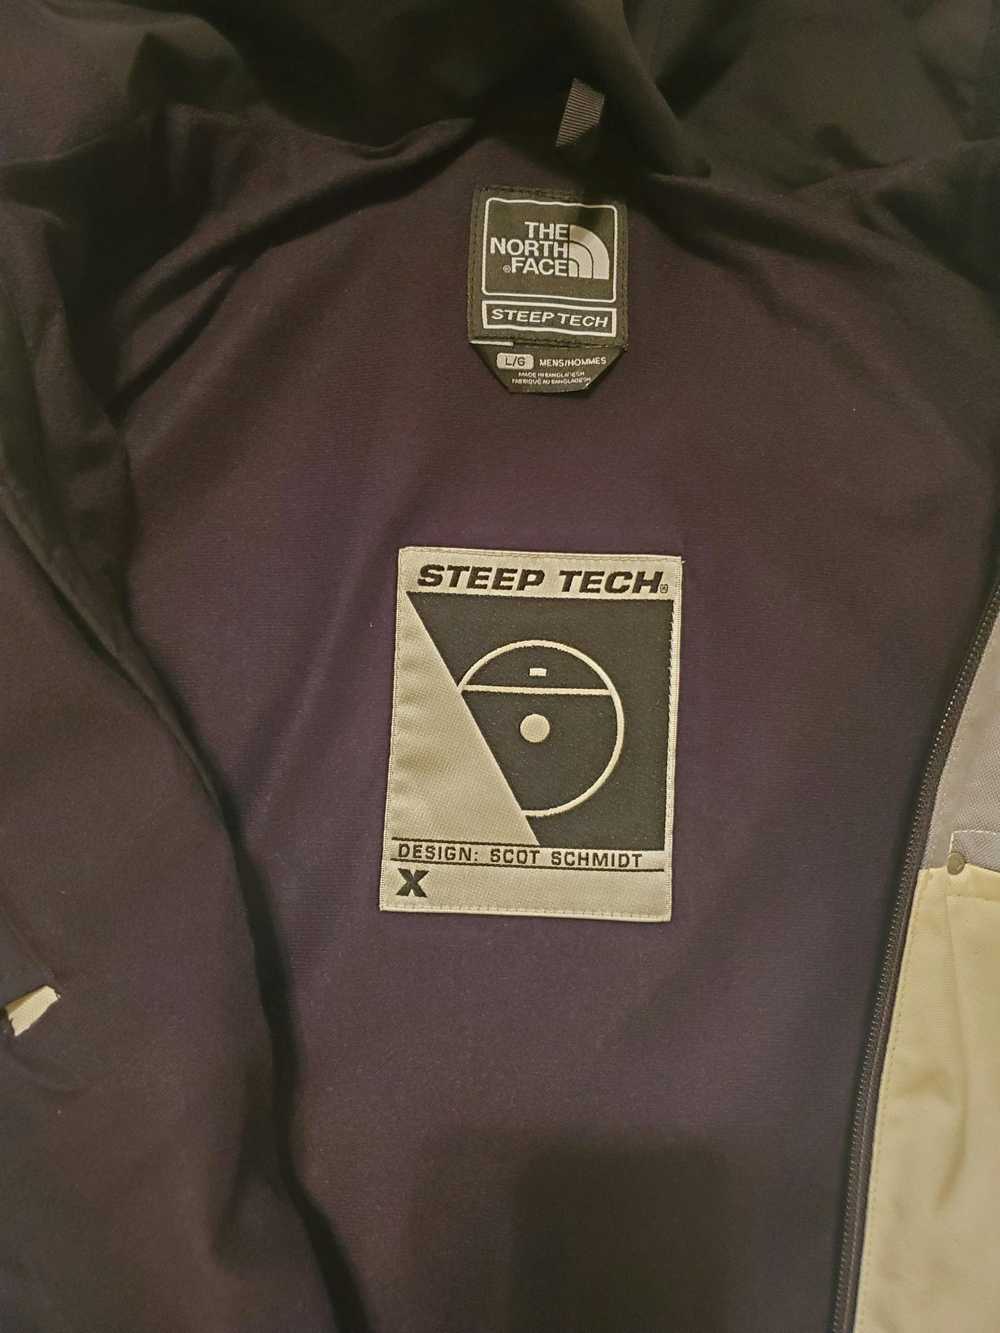 The North Face North Face Steep Tech Apogee - image 3